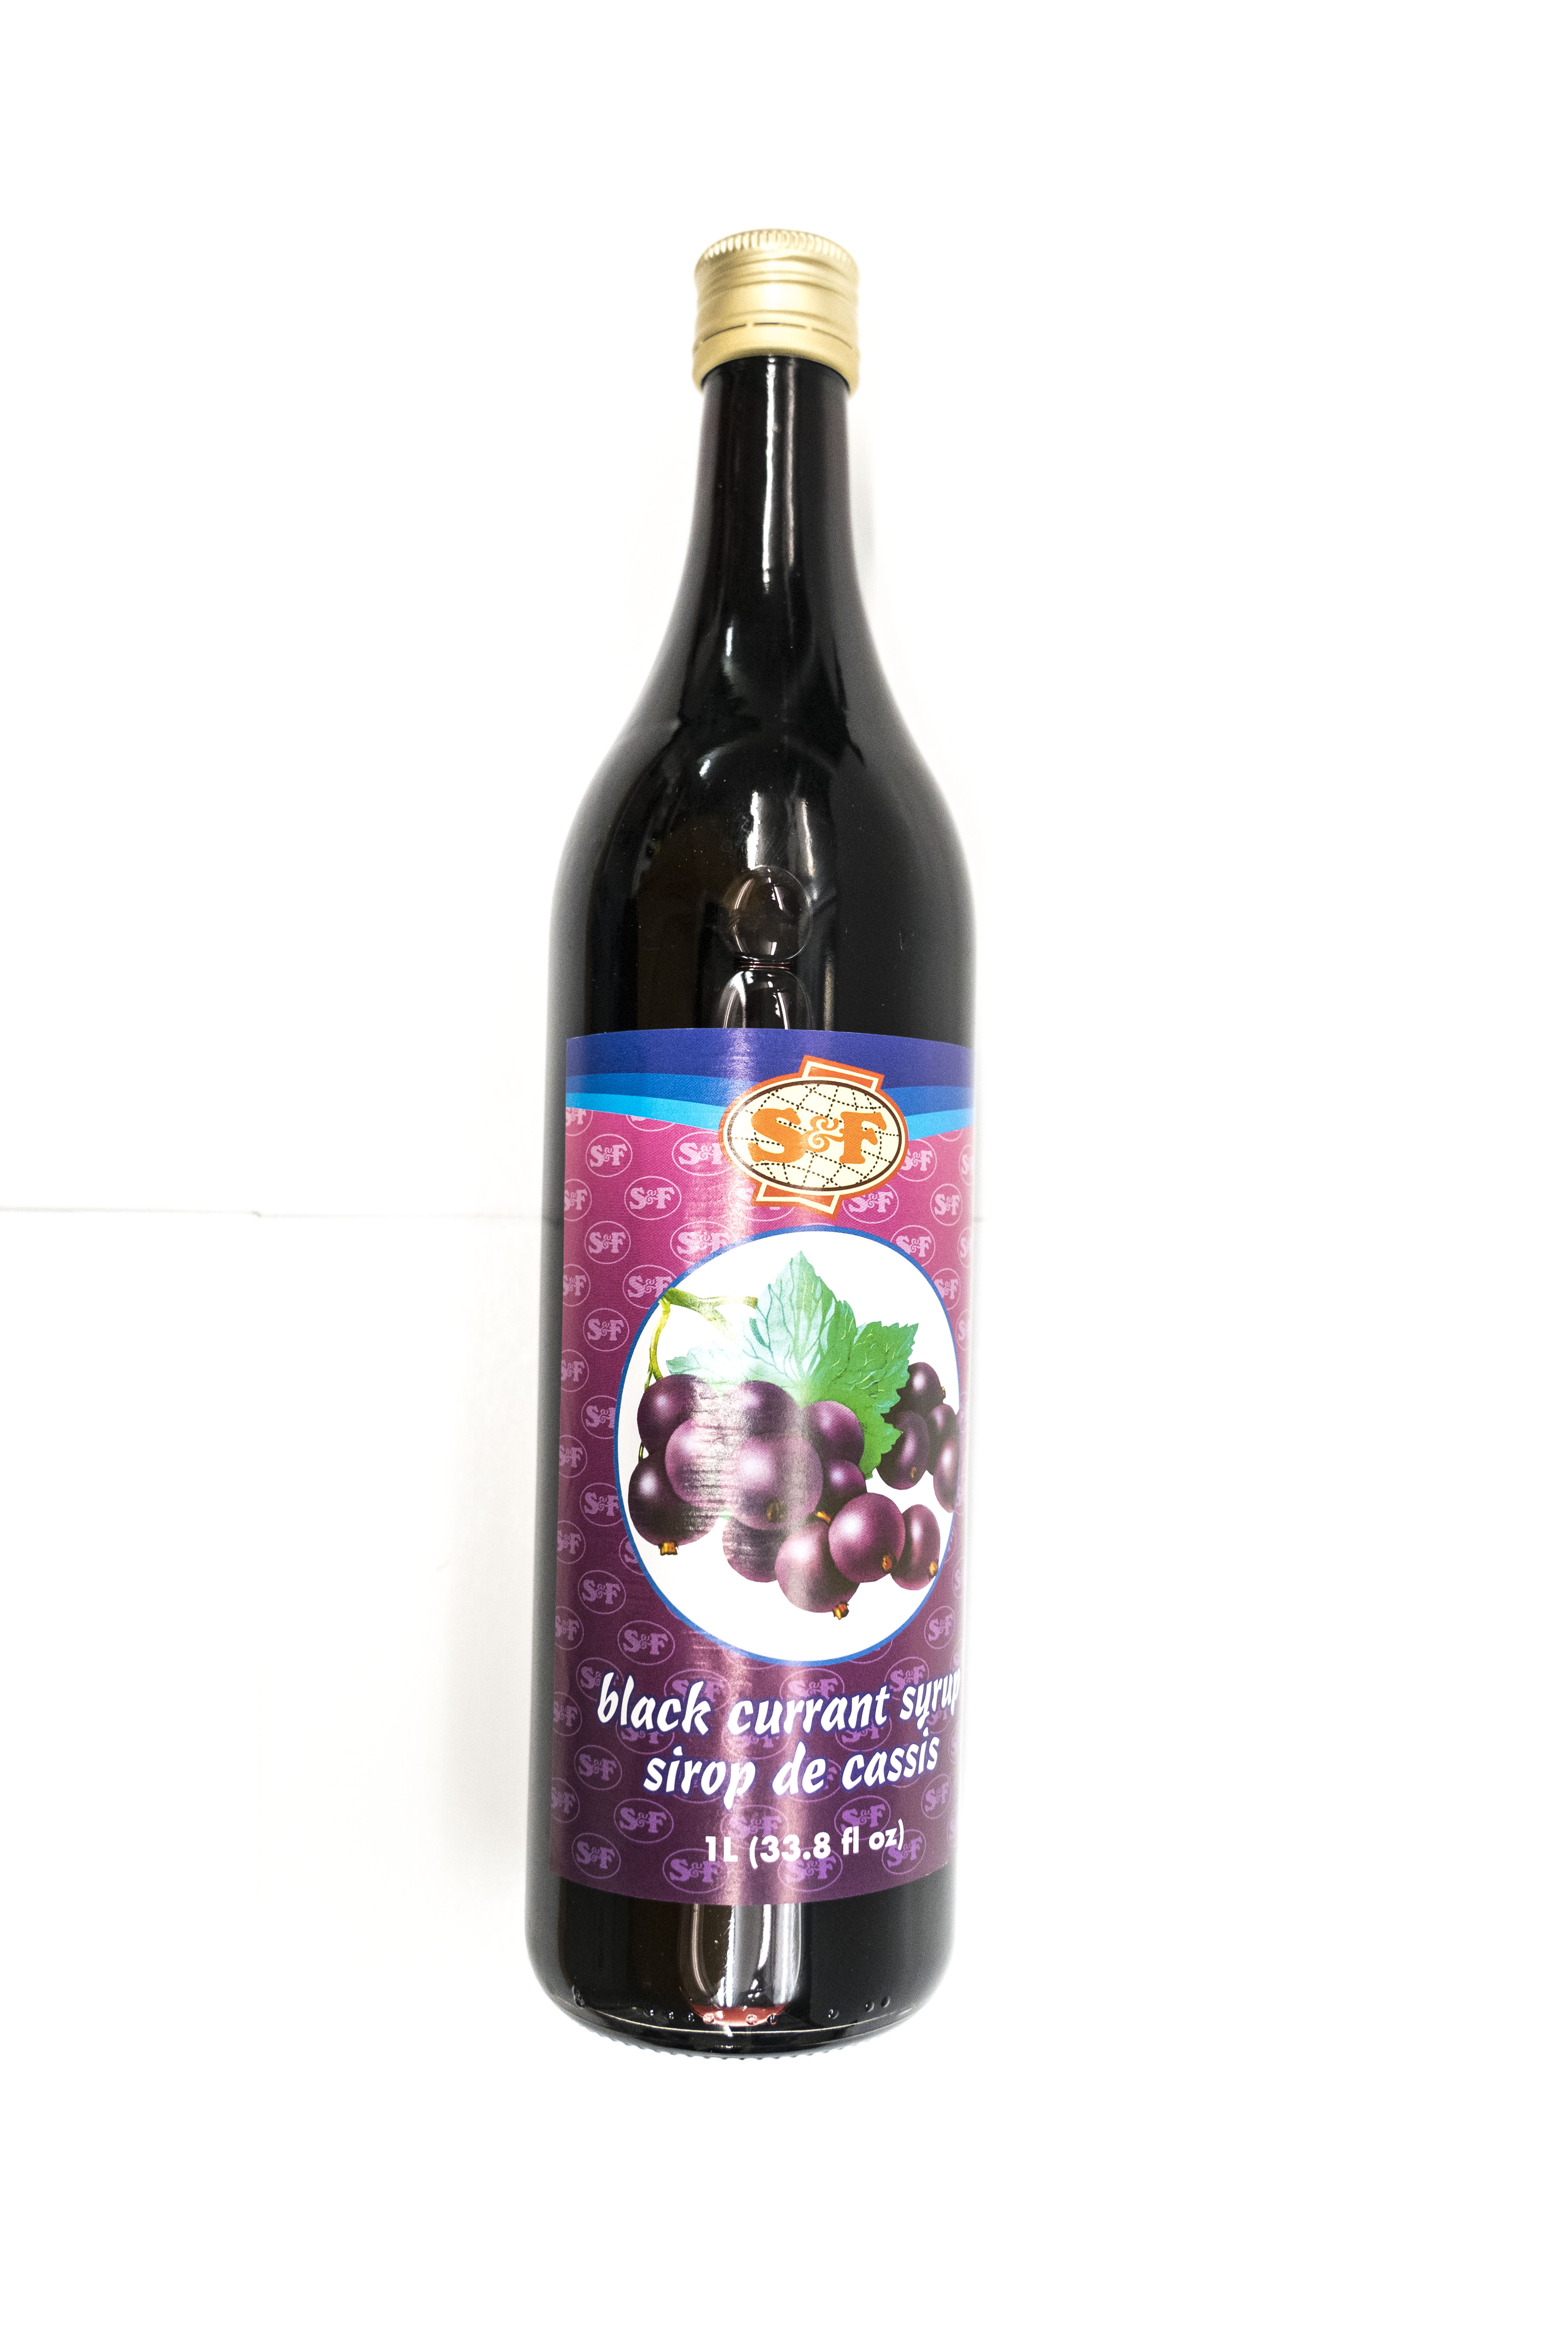 S&F Black Currant Syrup